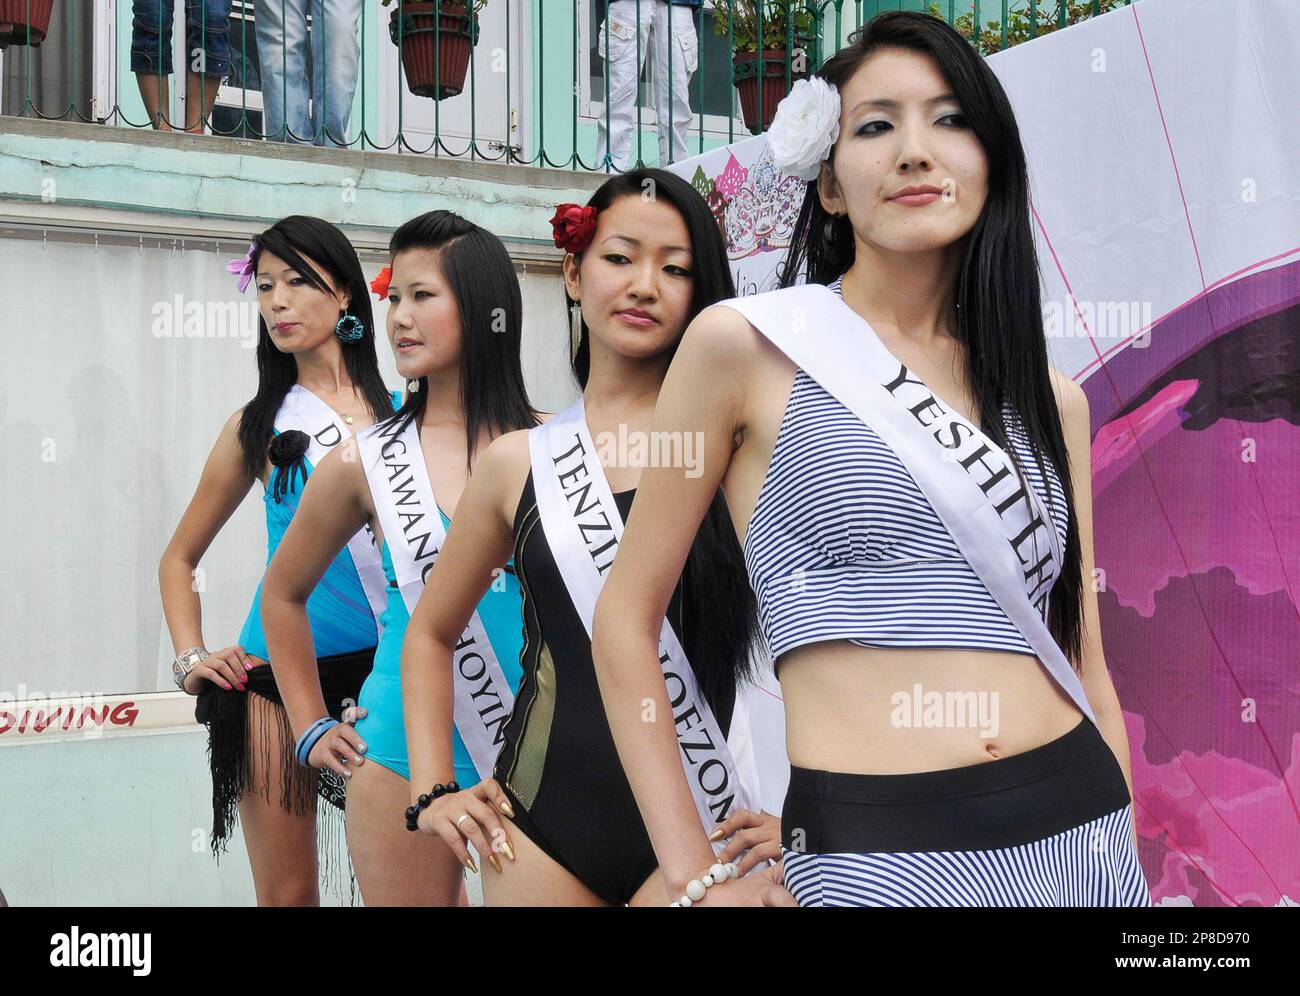 Participants of the Miss Tibet 2009 beauty pageant pose during the swimsuit round in Dharmsala, India, Friday, June 5, 2009. The winner will be announced in the final to be held on Sunday. (AP Photo/Tsering Topgyal) Stock Photo